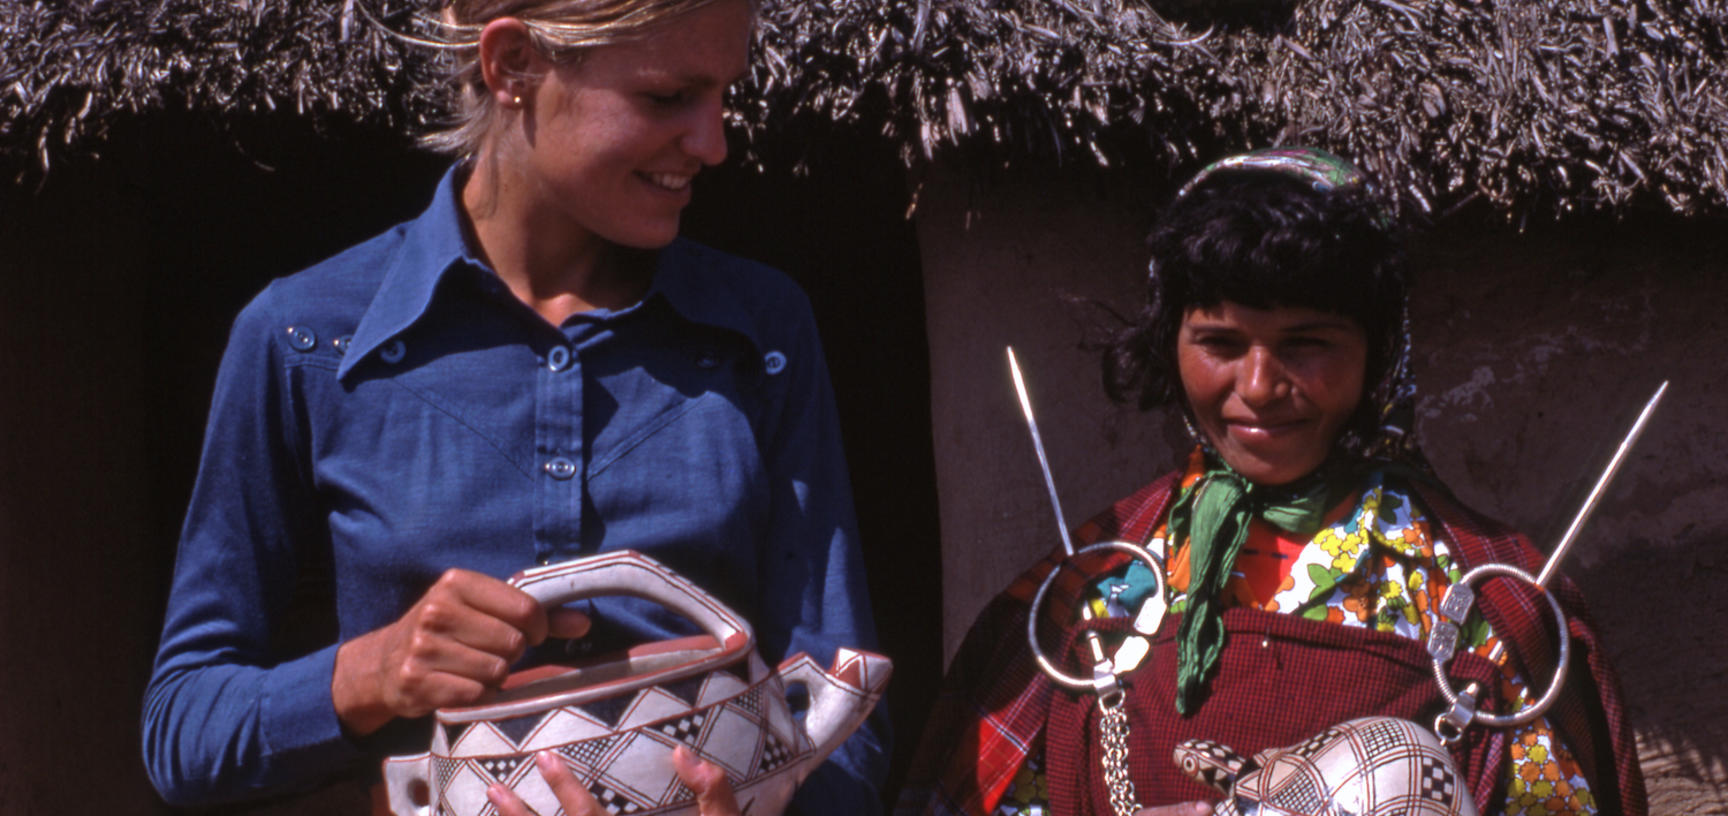 Two women holding pottery items  